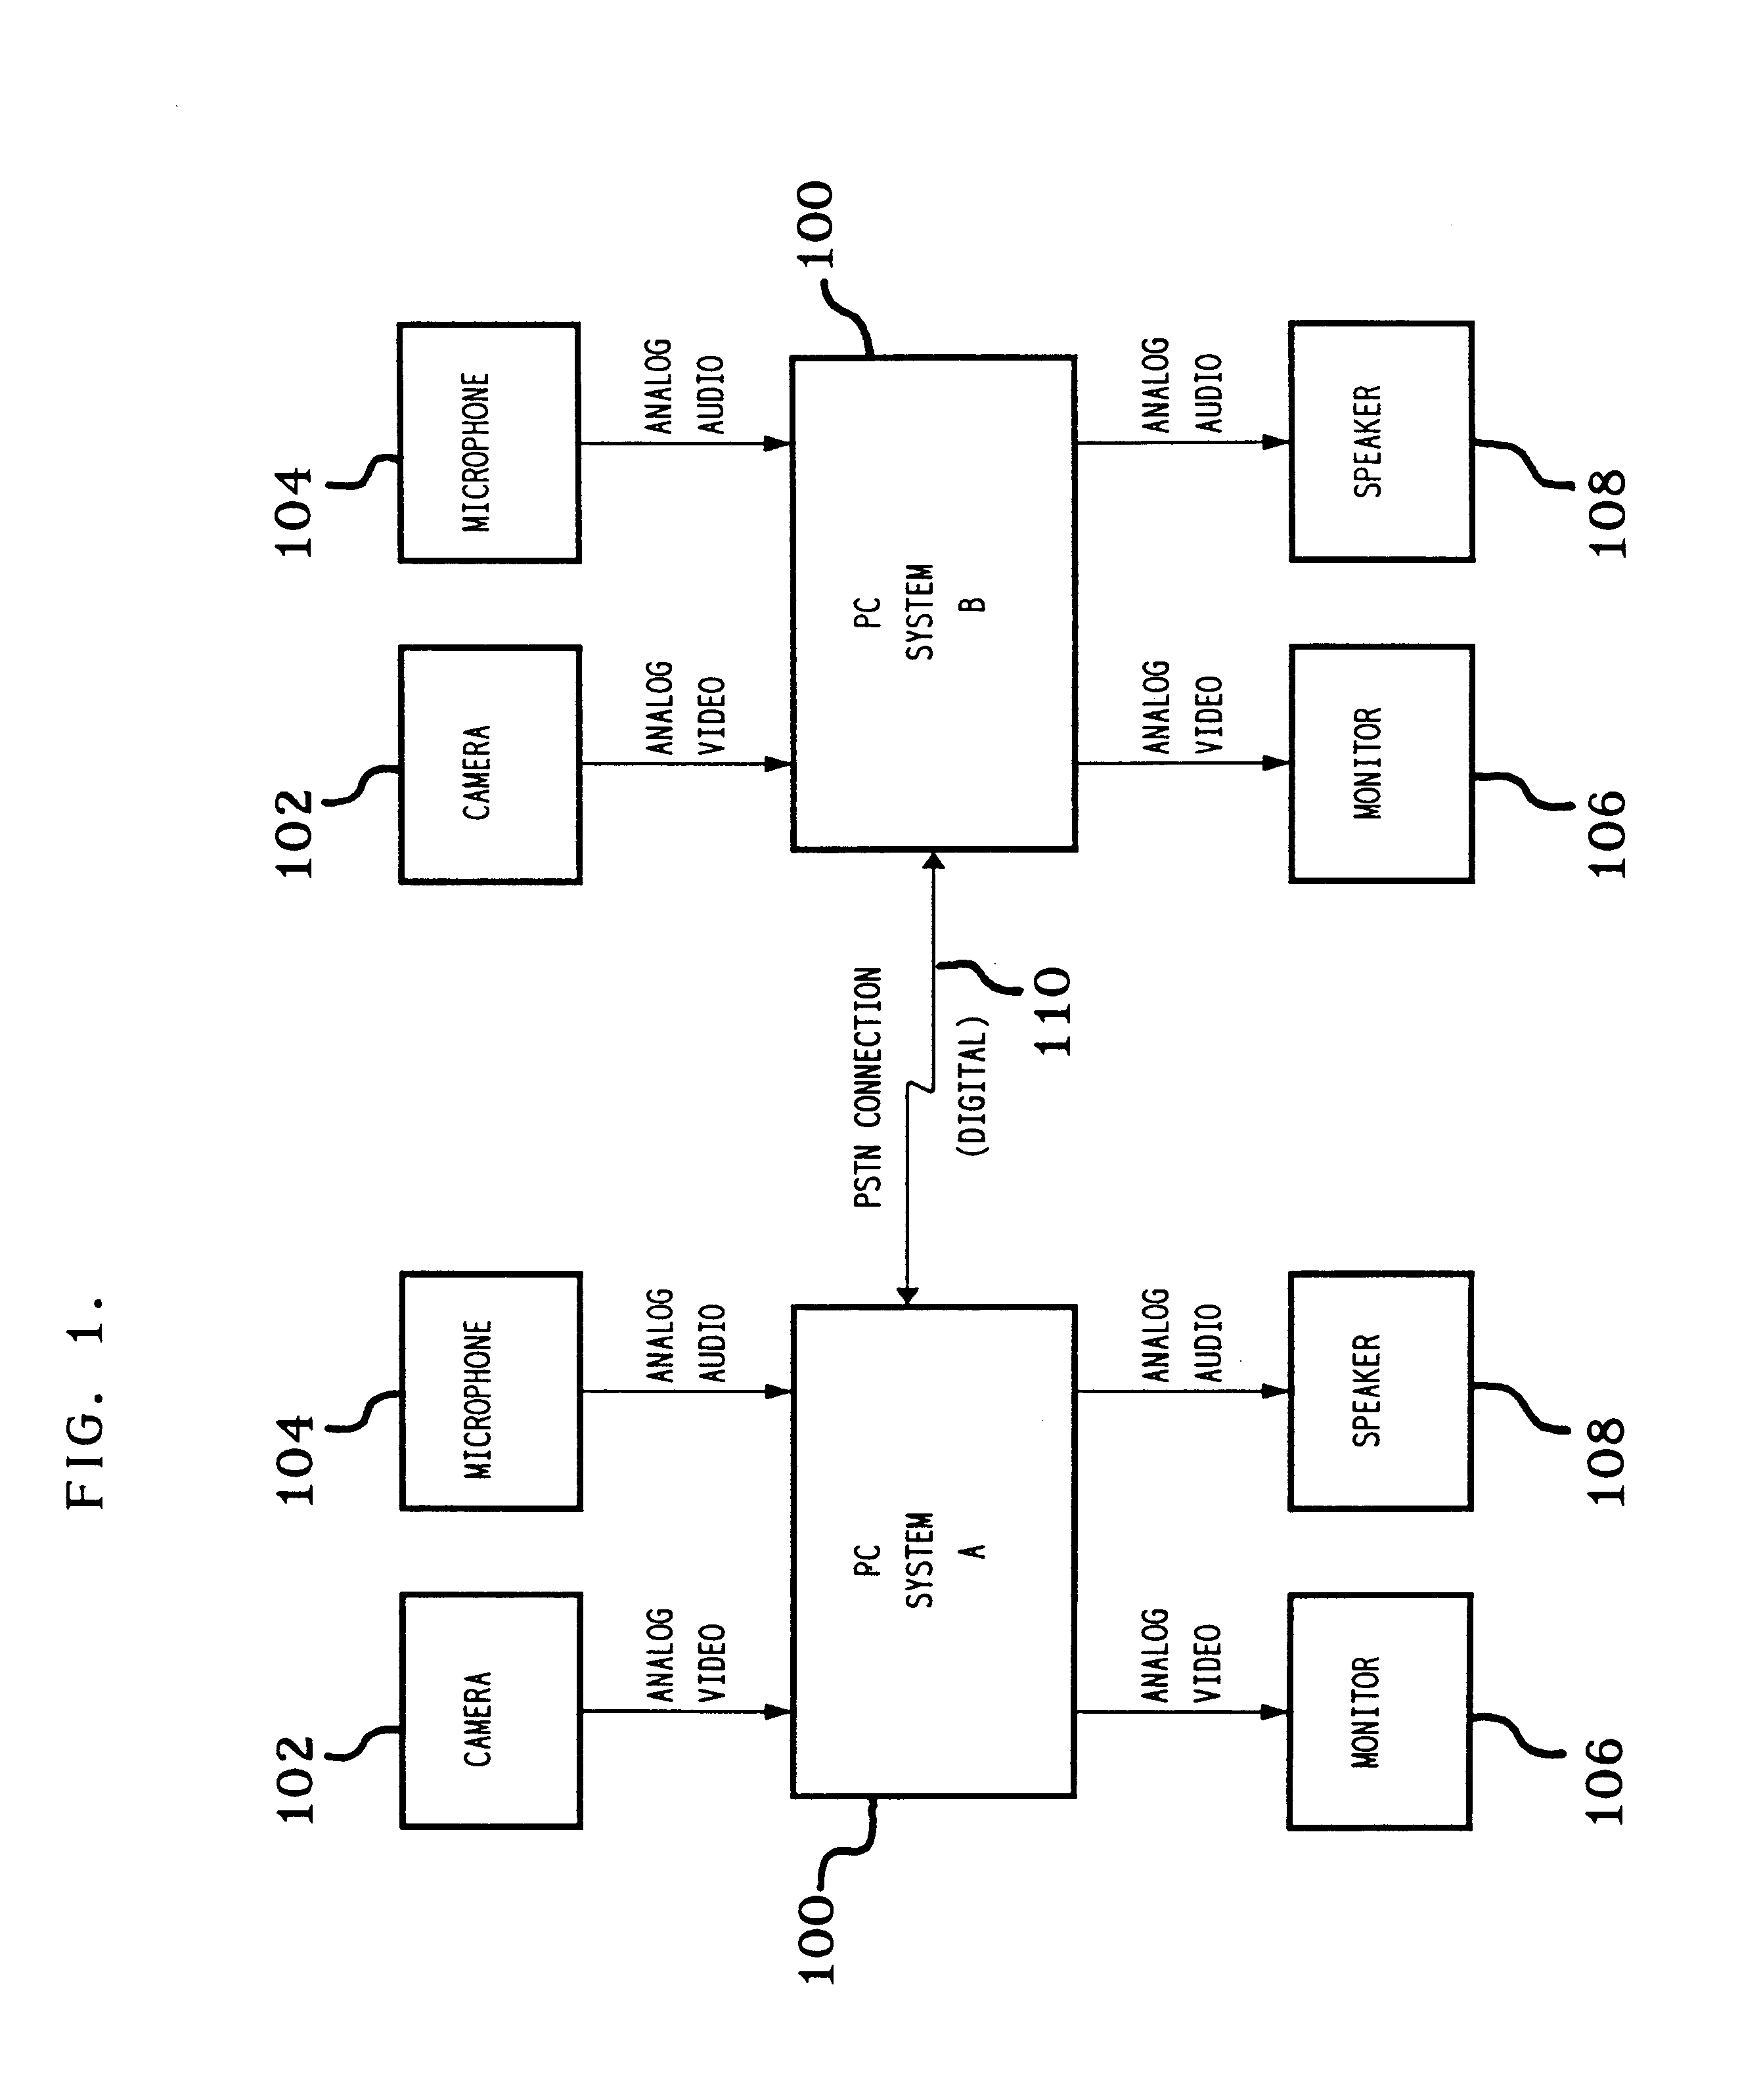 Using numbers of non-zero quantized transform signals and signal differences to determine when to encode video signals using inter-frame or intra-frame encoding